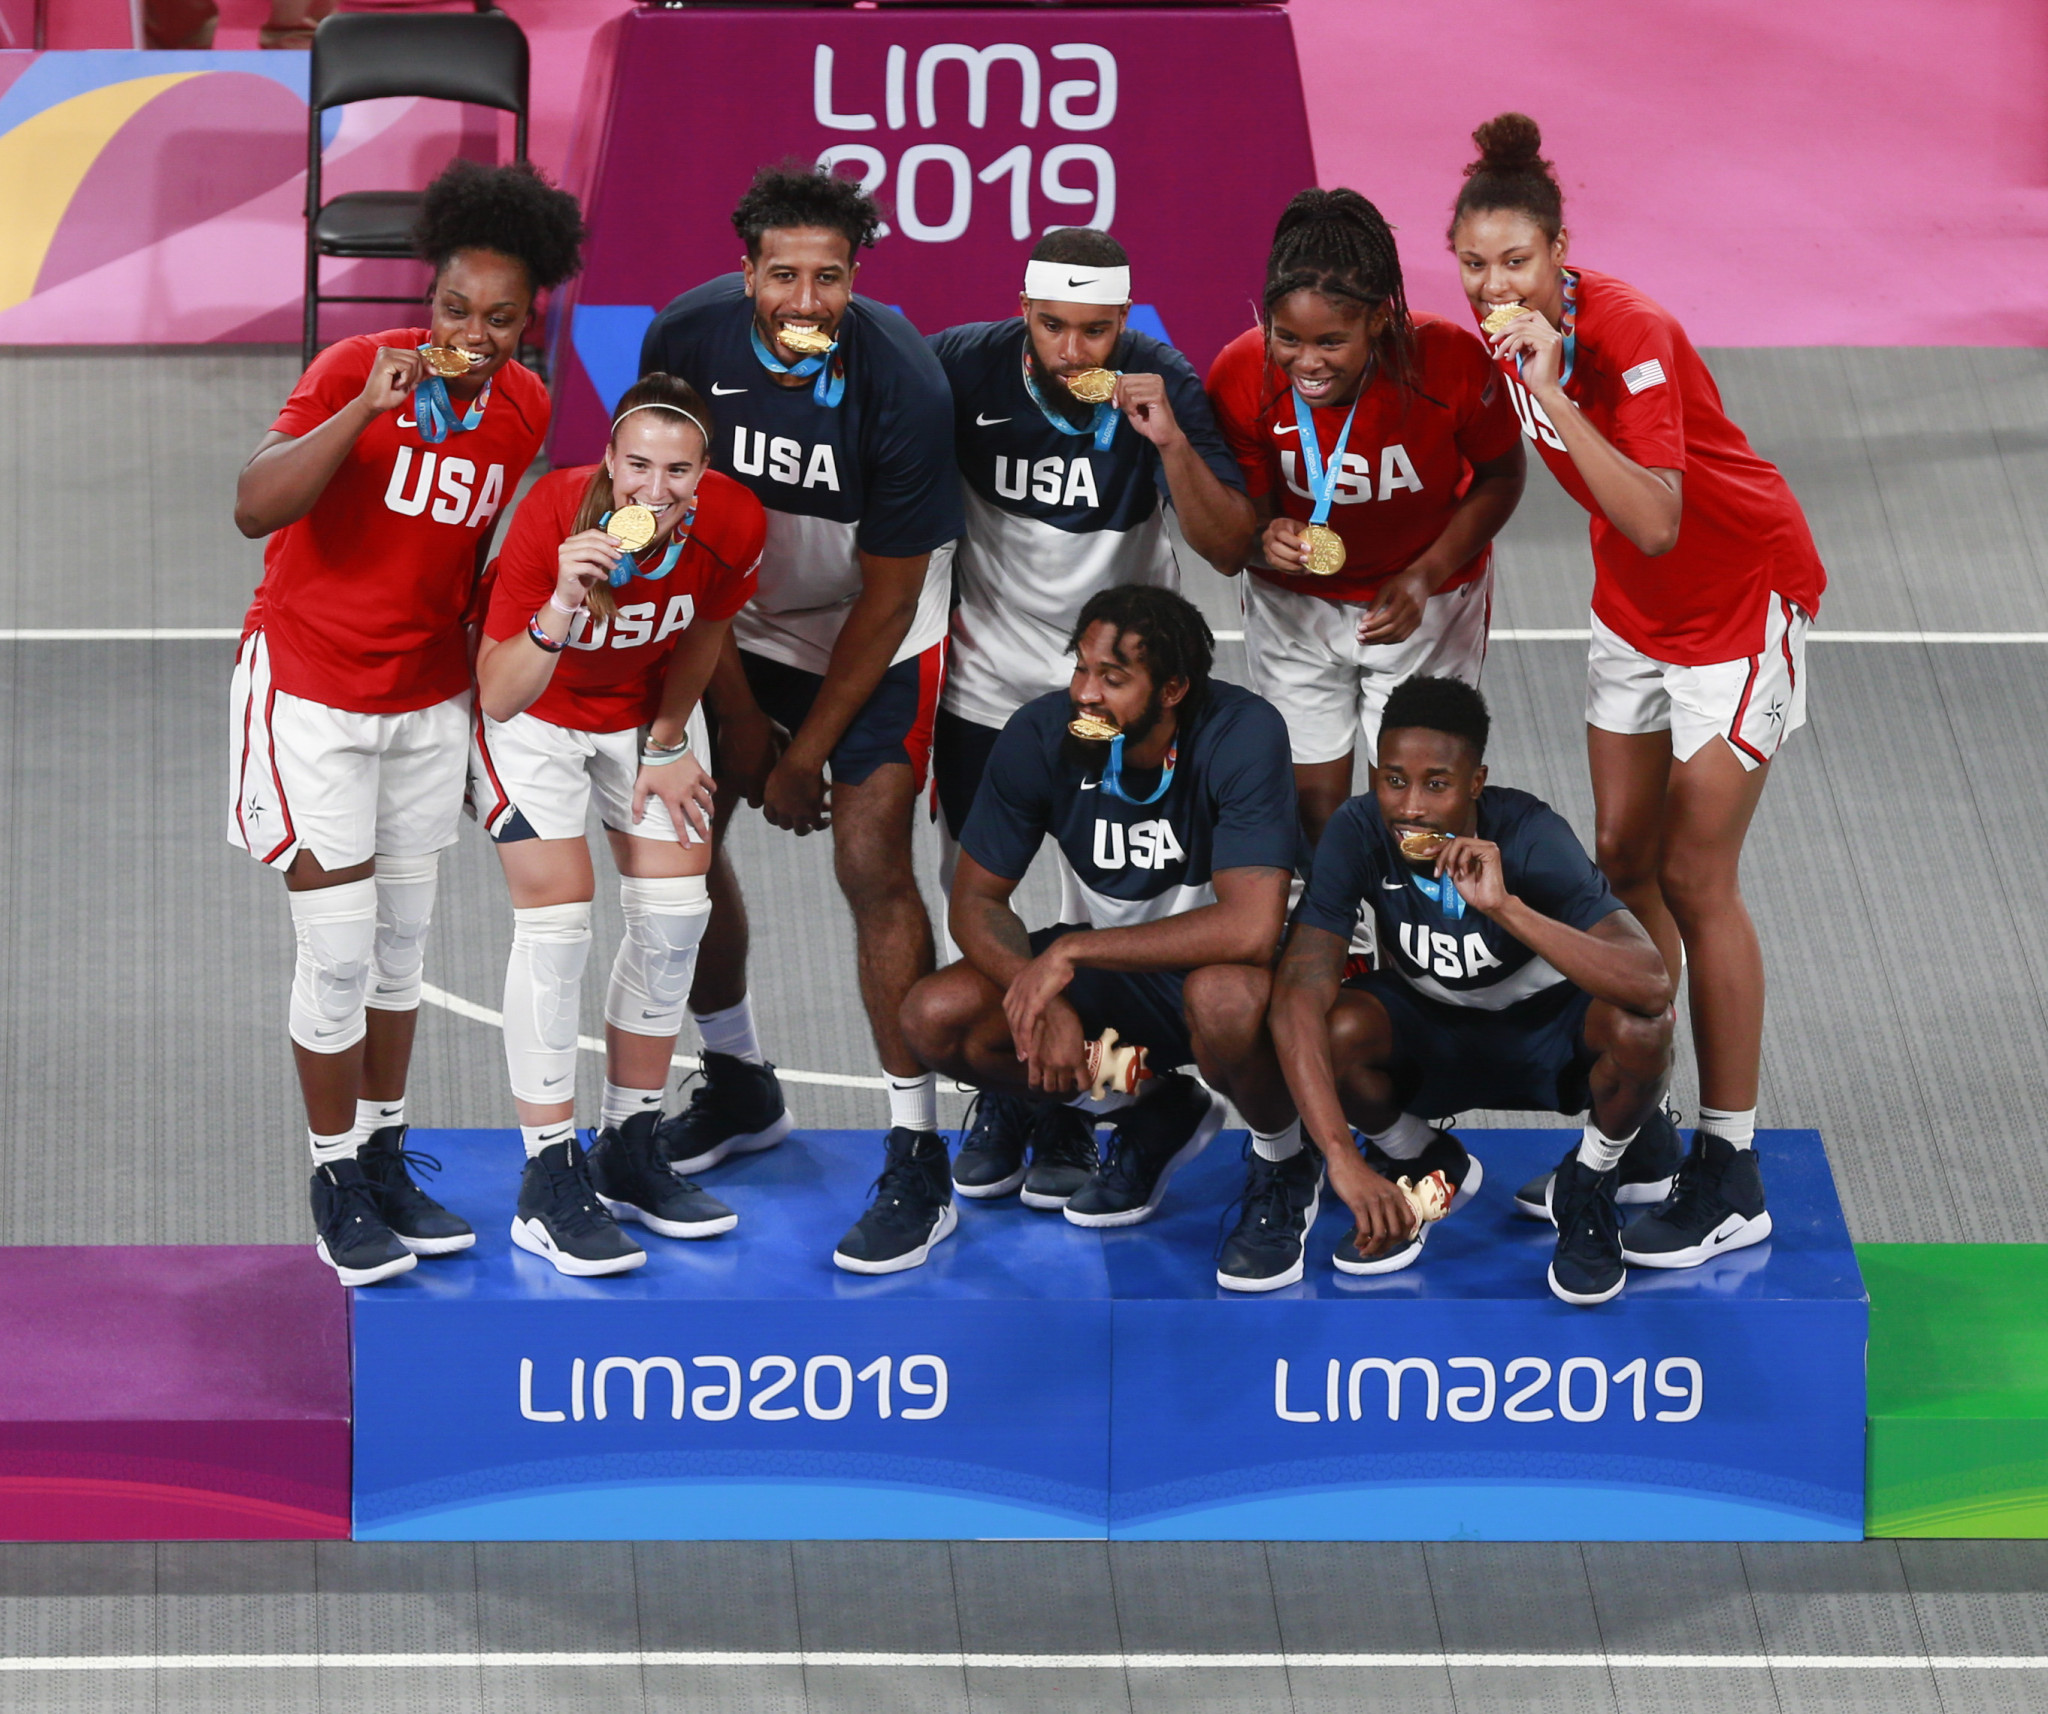 The women's team then defeated Argentina to also win gold ©Lima 2019